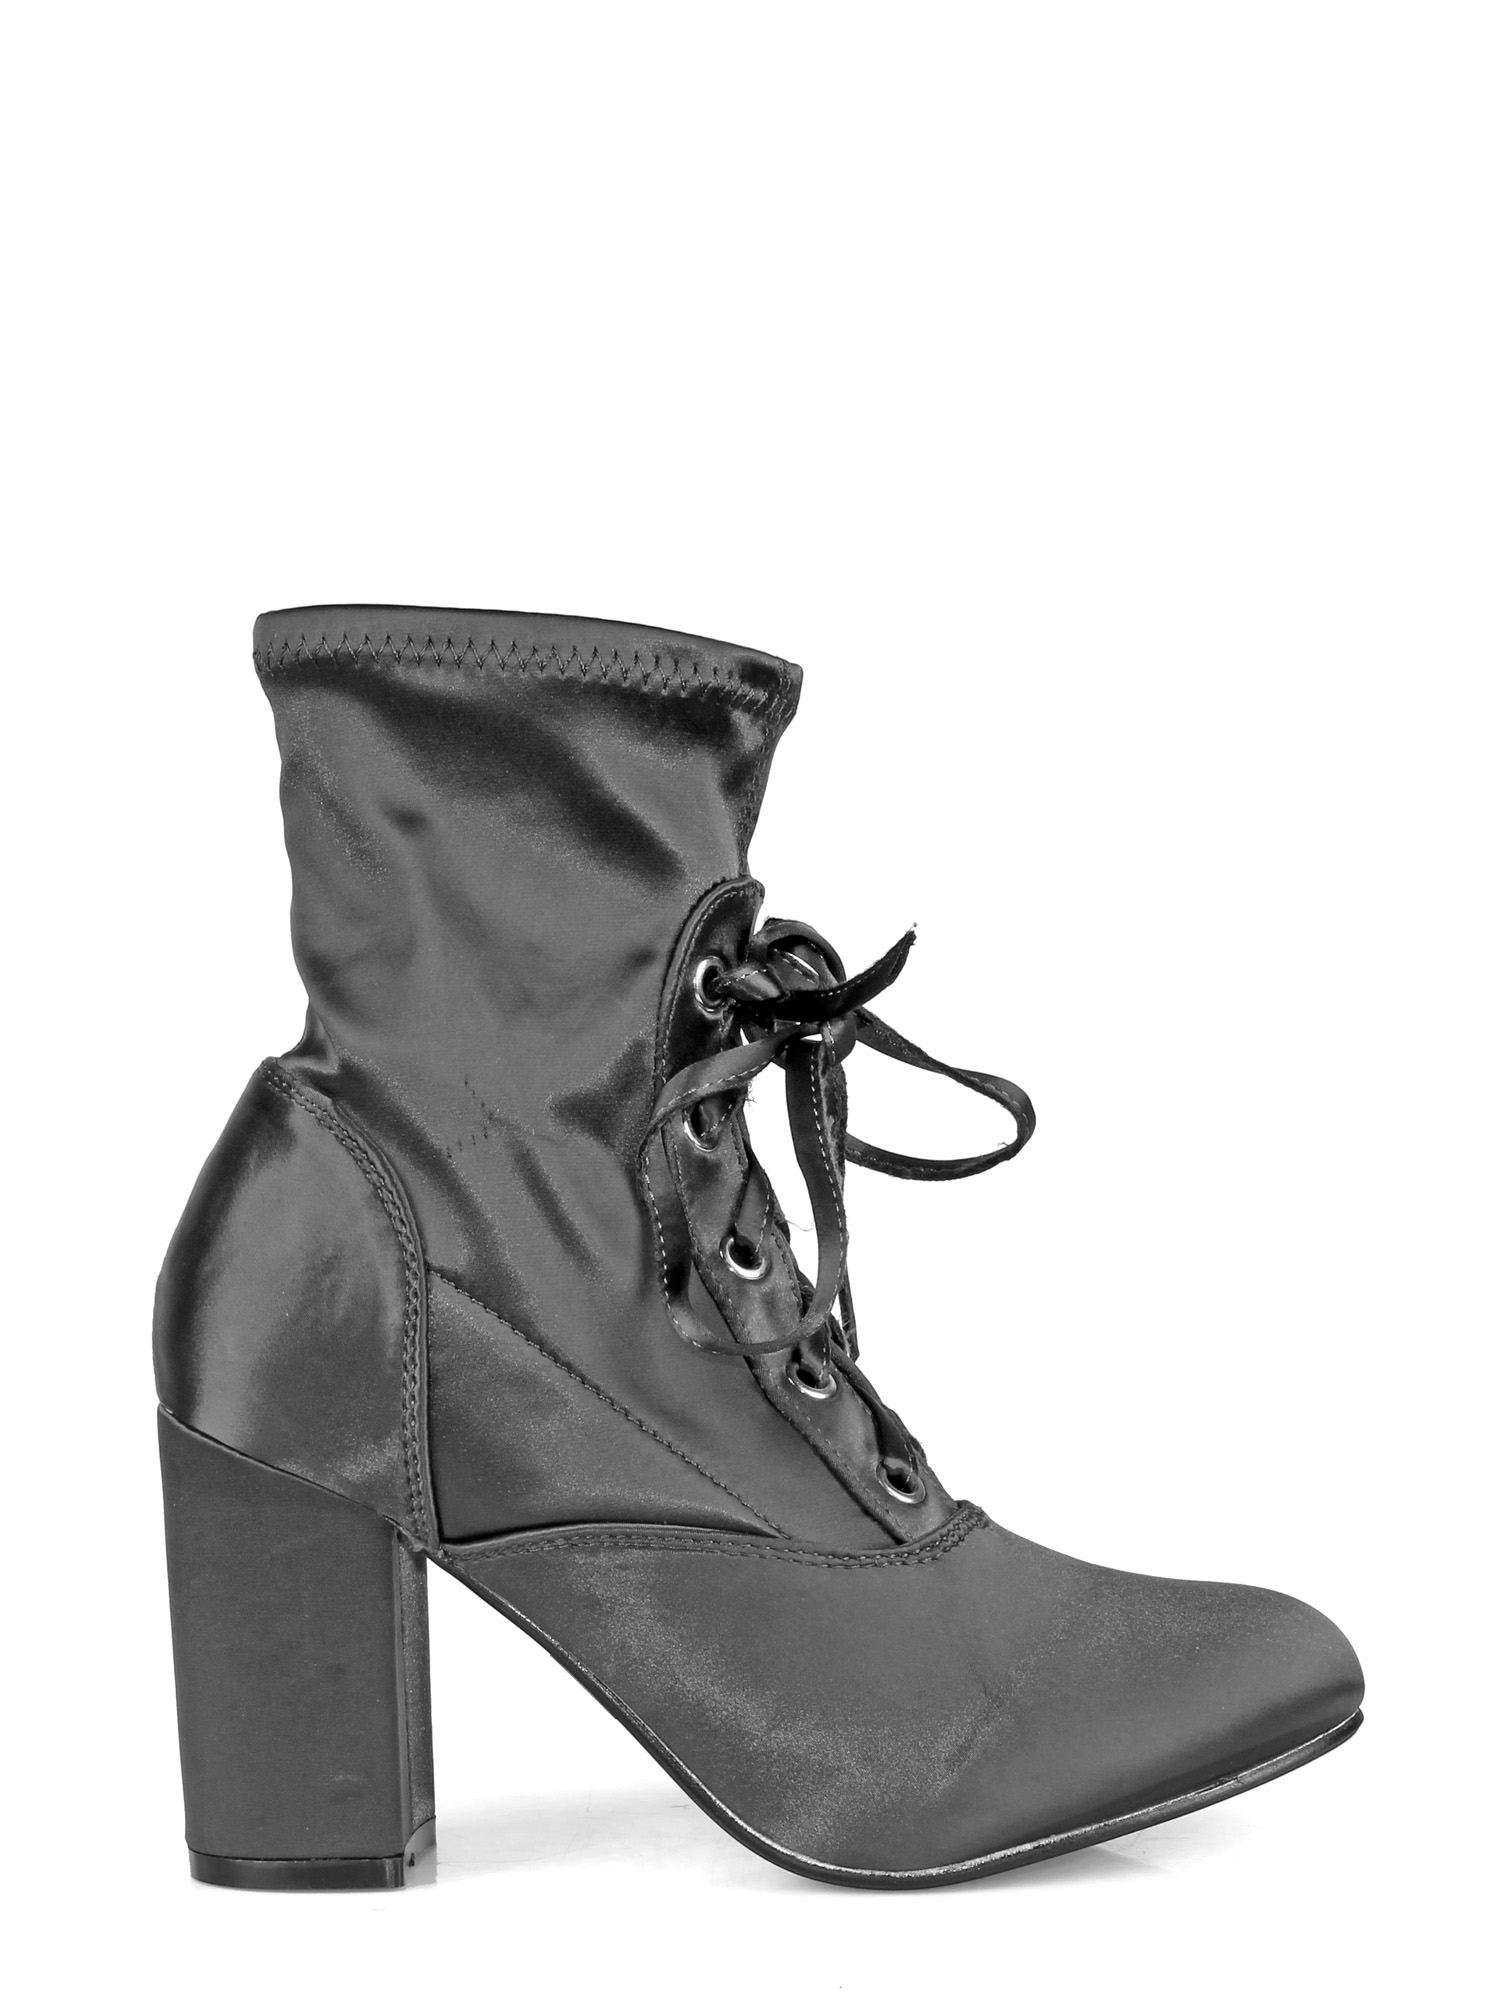 Nature Breeze Lace up Almond Toe Chunk Heel Women's Anke Boots in Grey - image 2 of 3